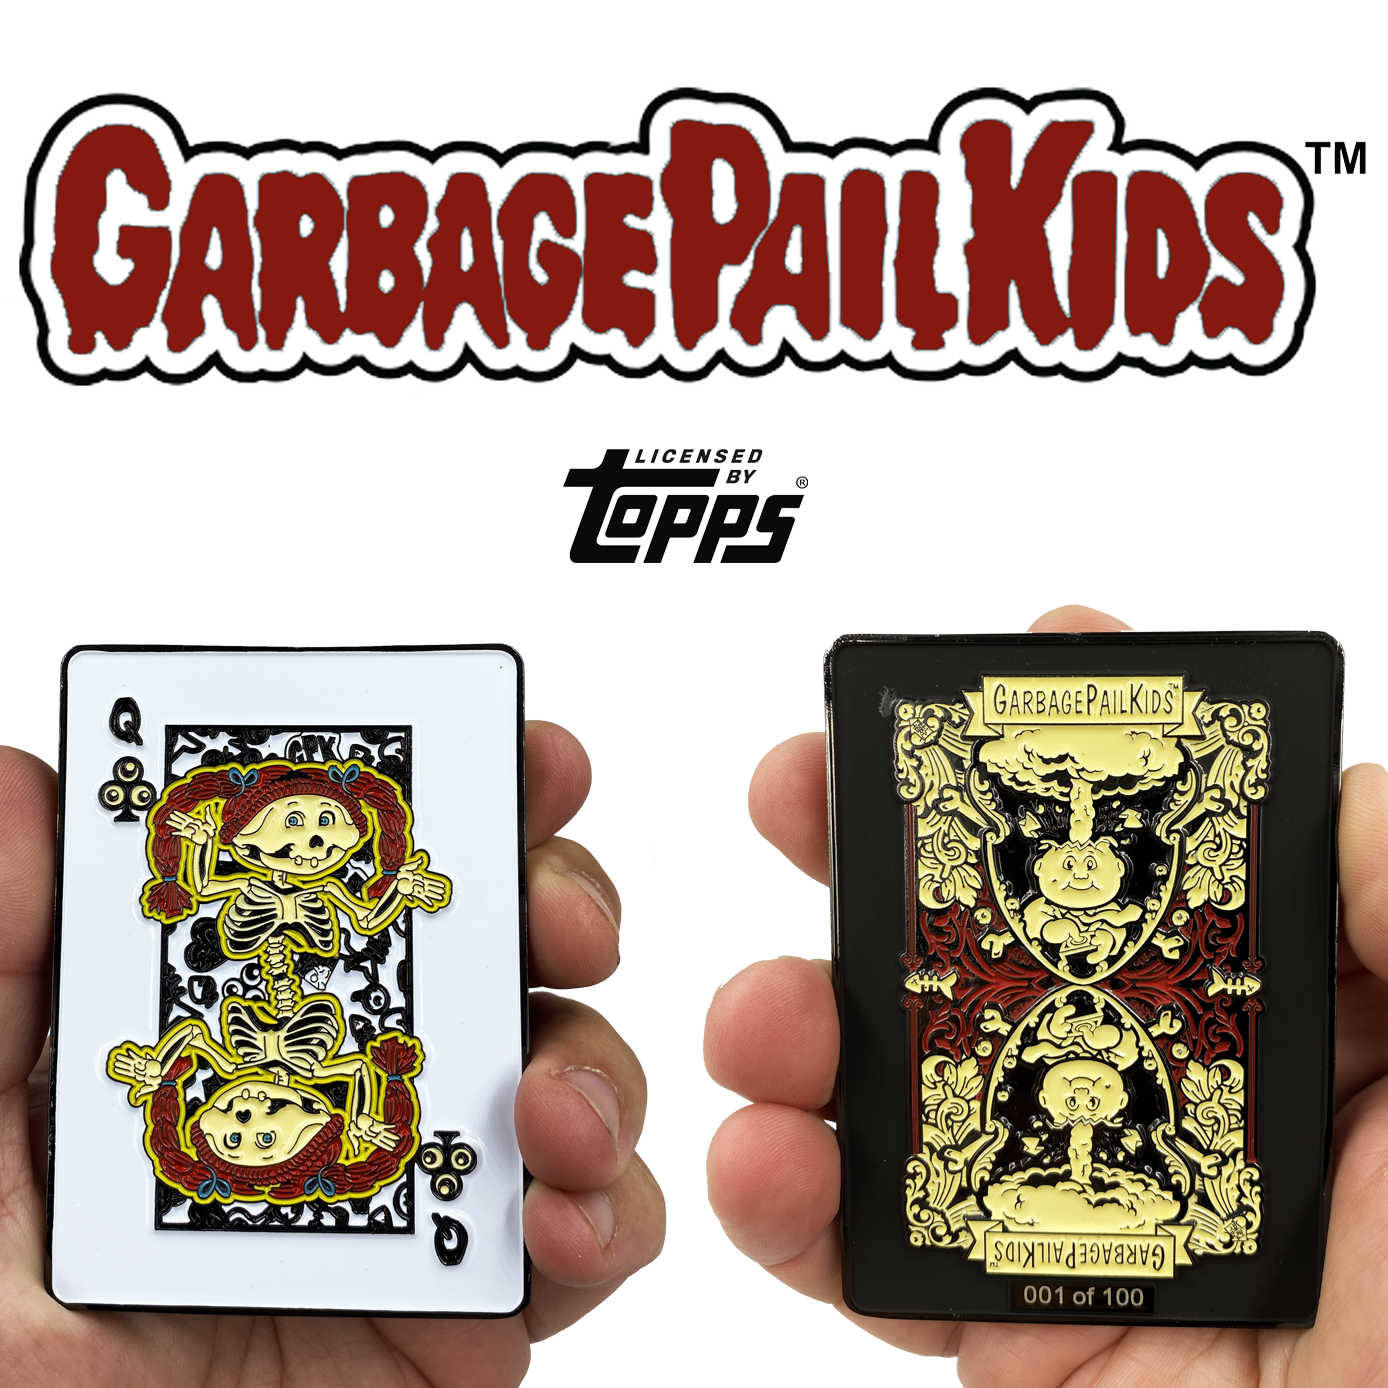 Bony Joanie GPK Challenge Coin Officially Licensed Topps Garbage Pail Kids Playing Cards Challenge Coin